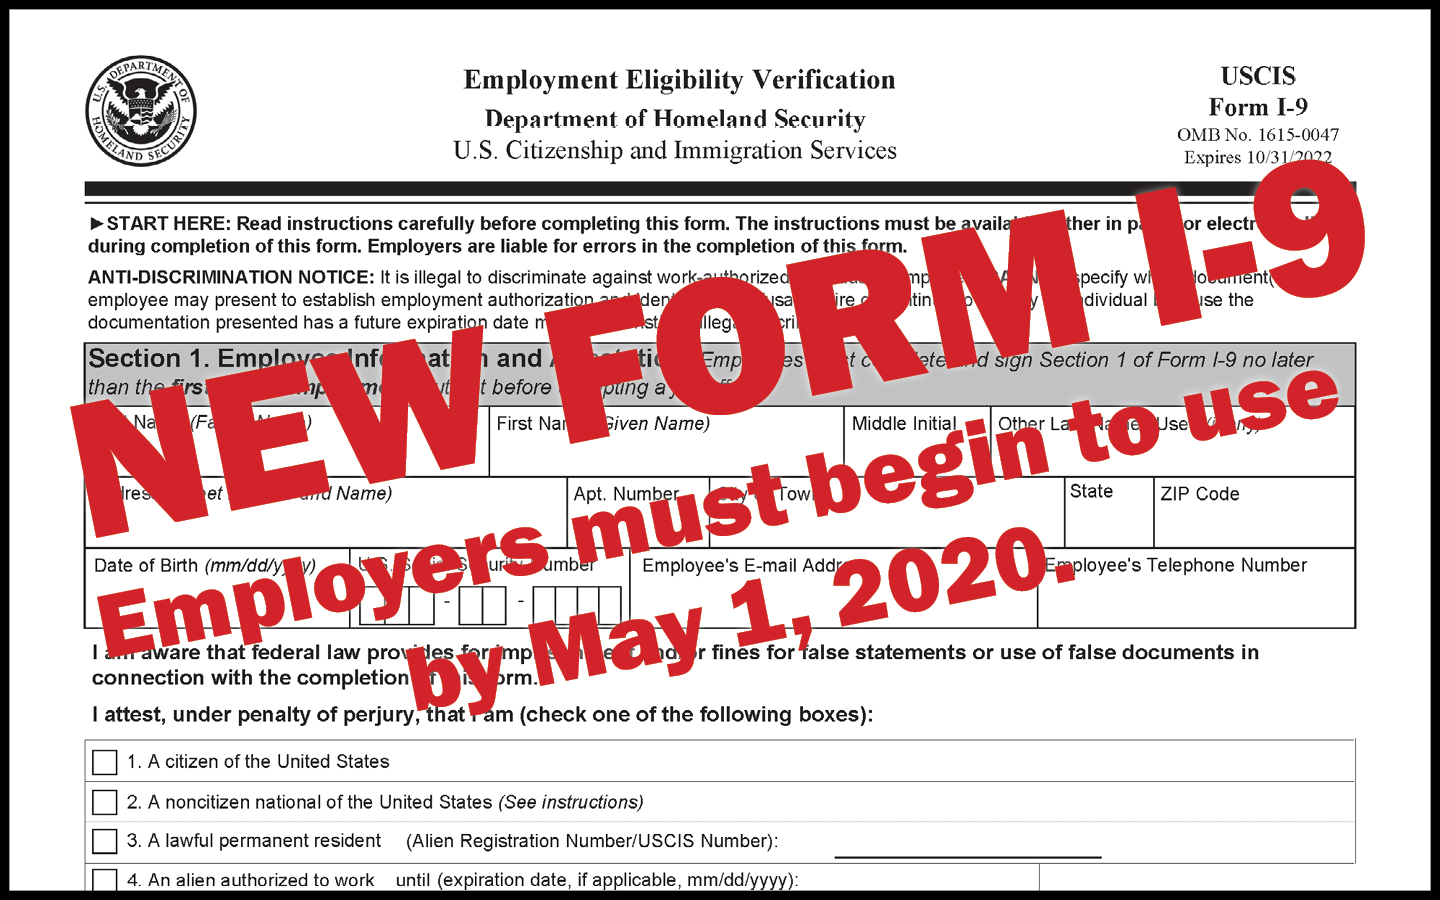 Employers Must Begin Using New Form I-9May 1 - Colorado